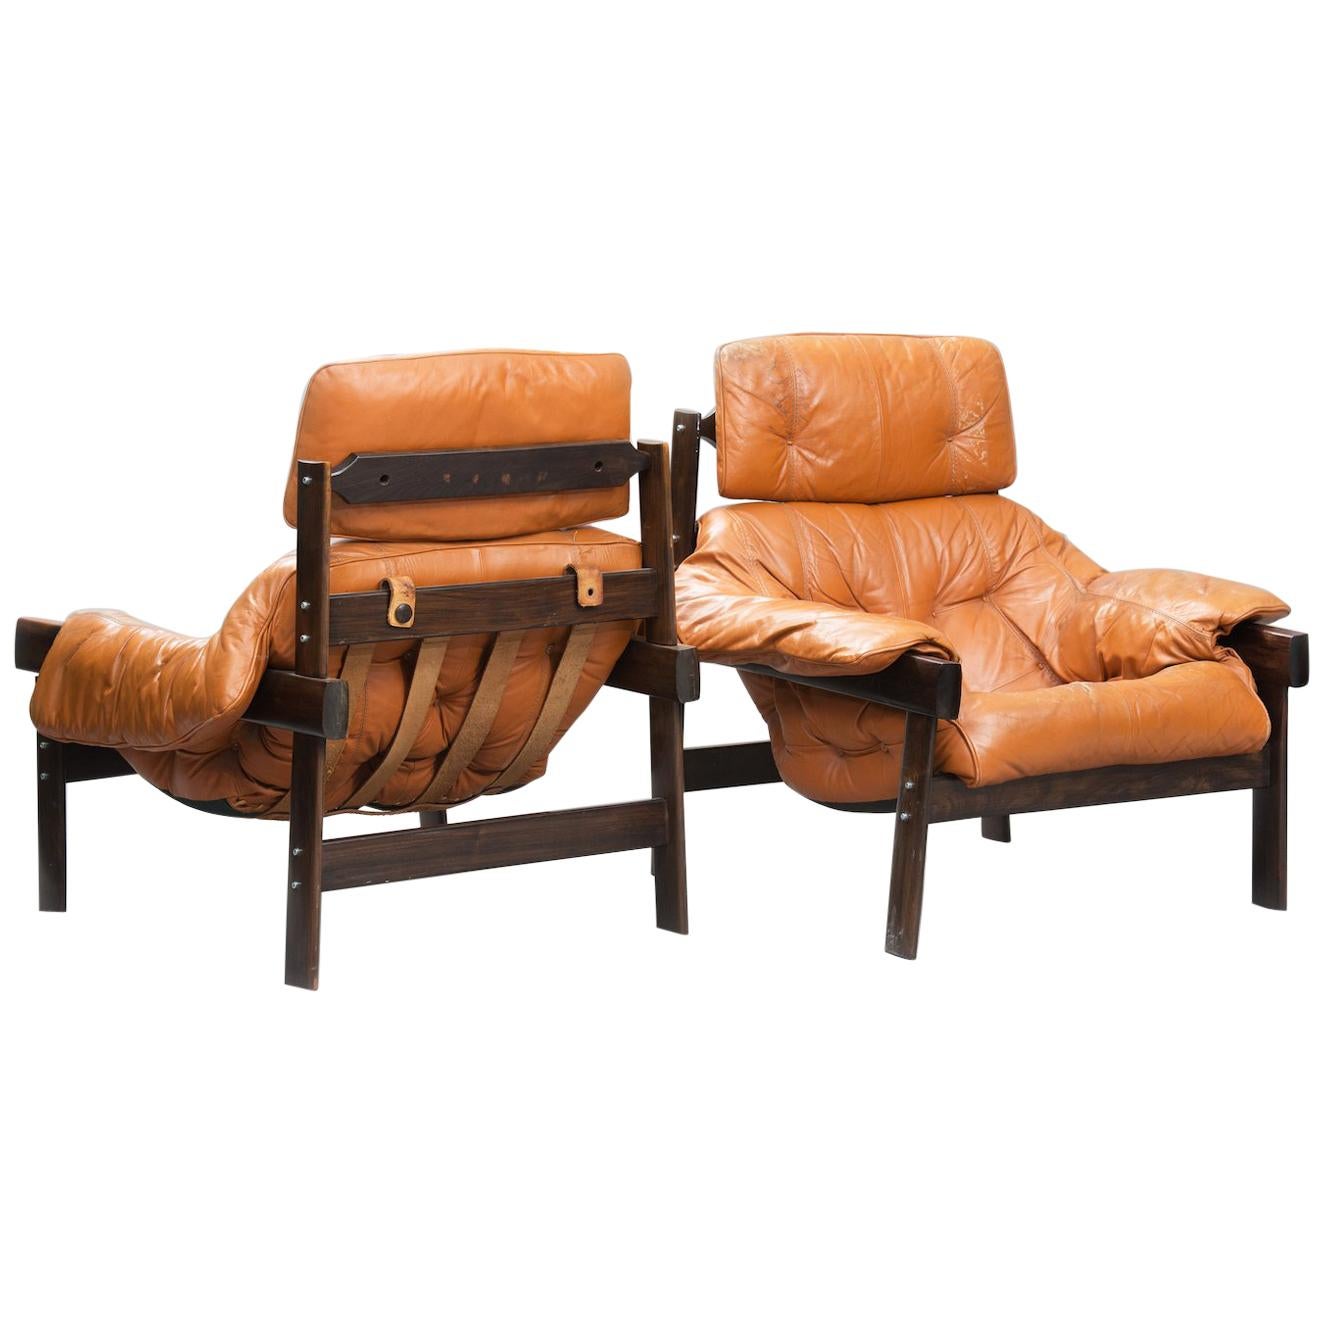 Percival Lafer mid-century modern rosewood lounge Chairs for Lafer, Brazil 1960s For Sale